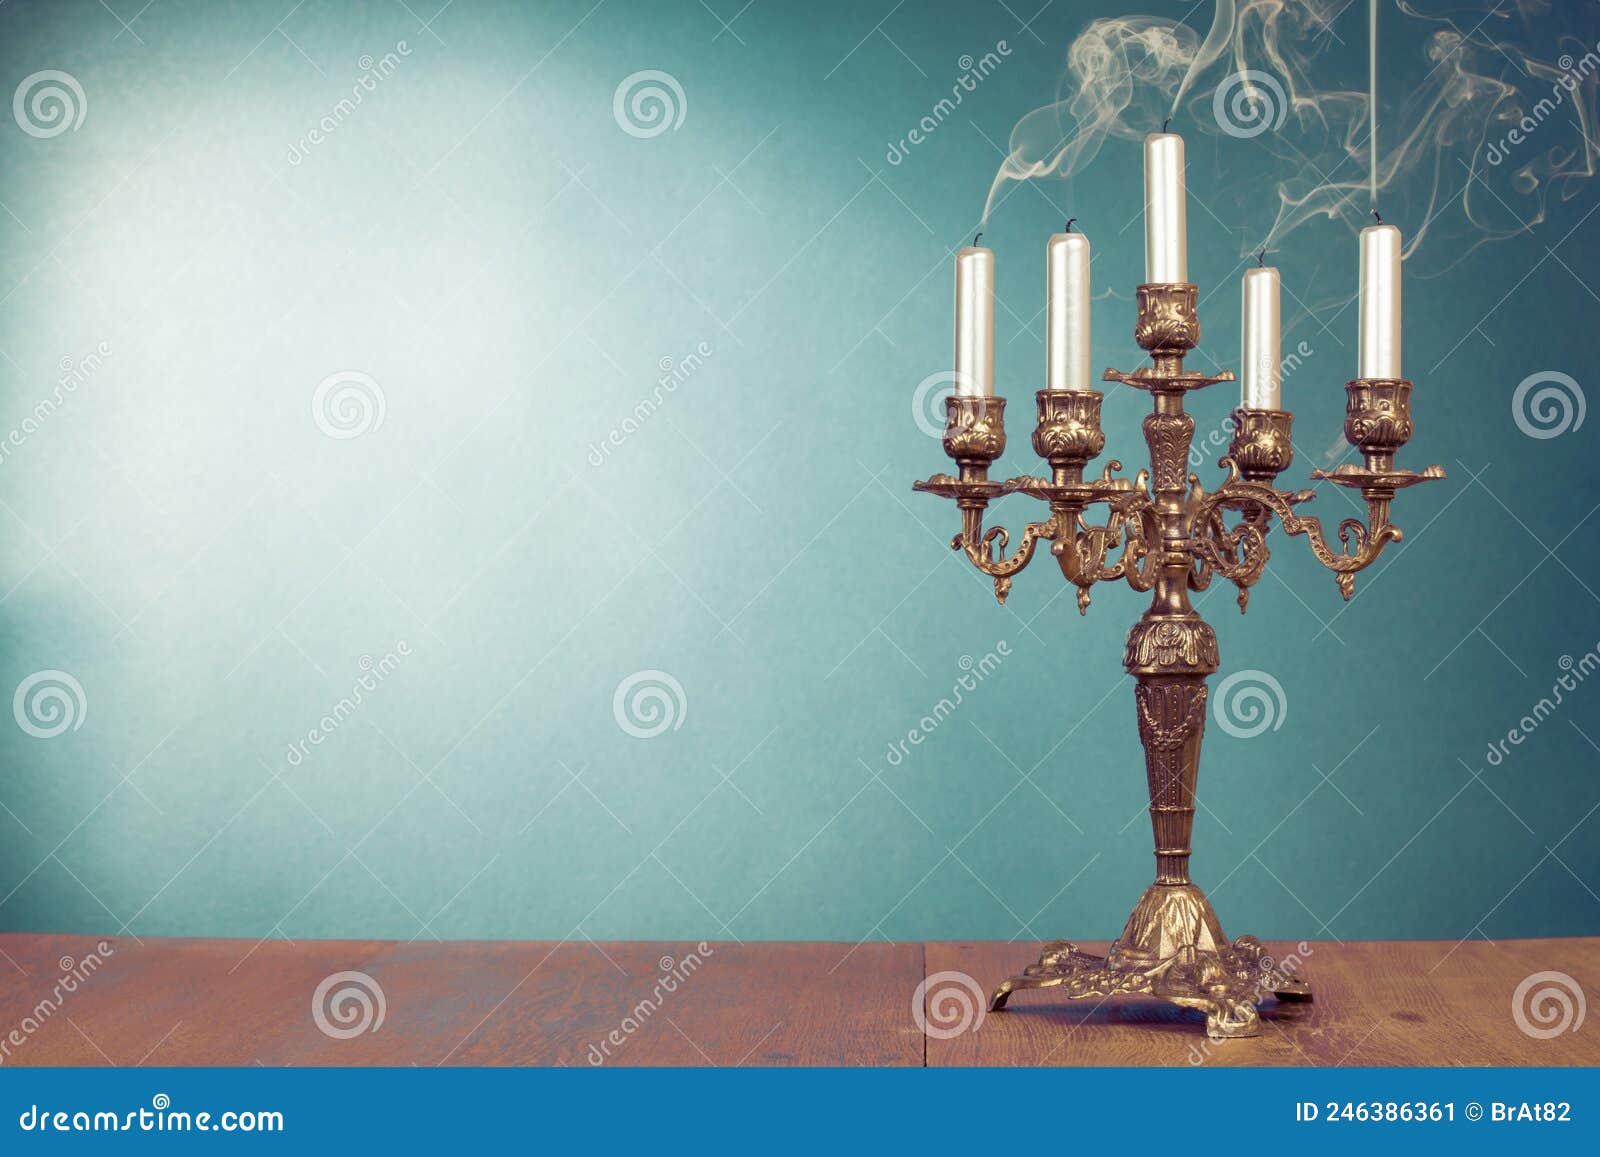 vintage bronze candlestick with five reek candles in front mint blue background